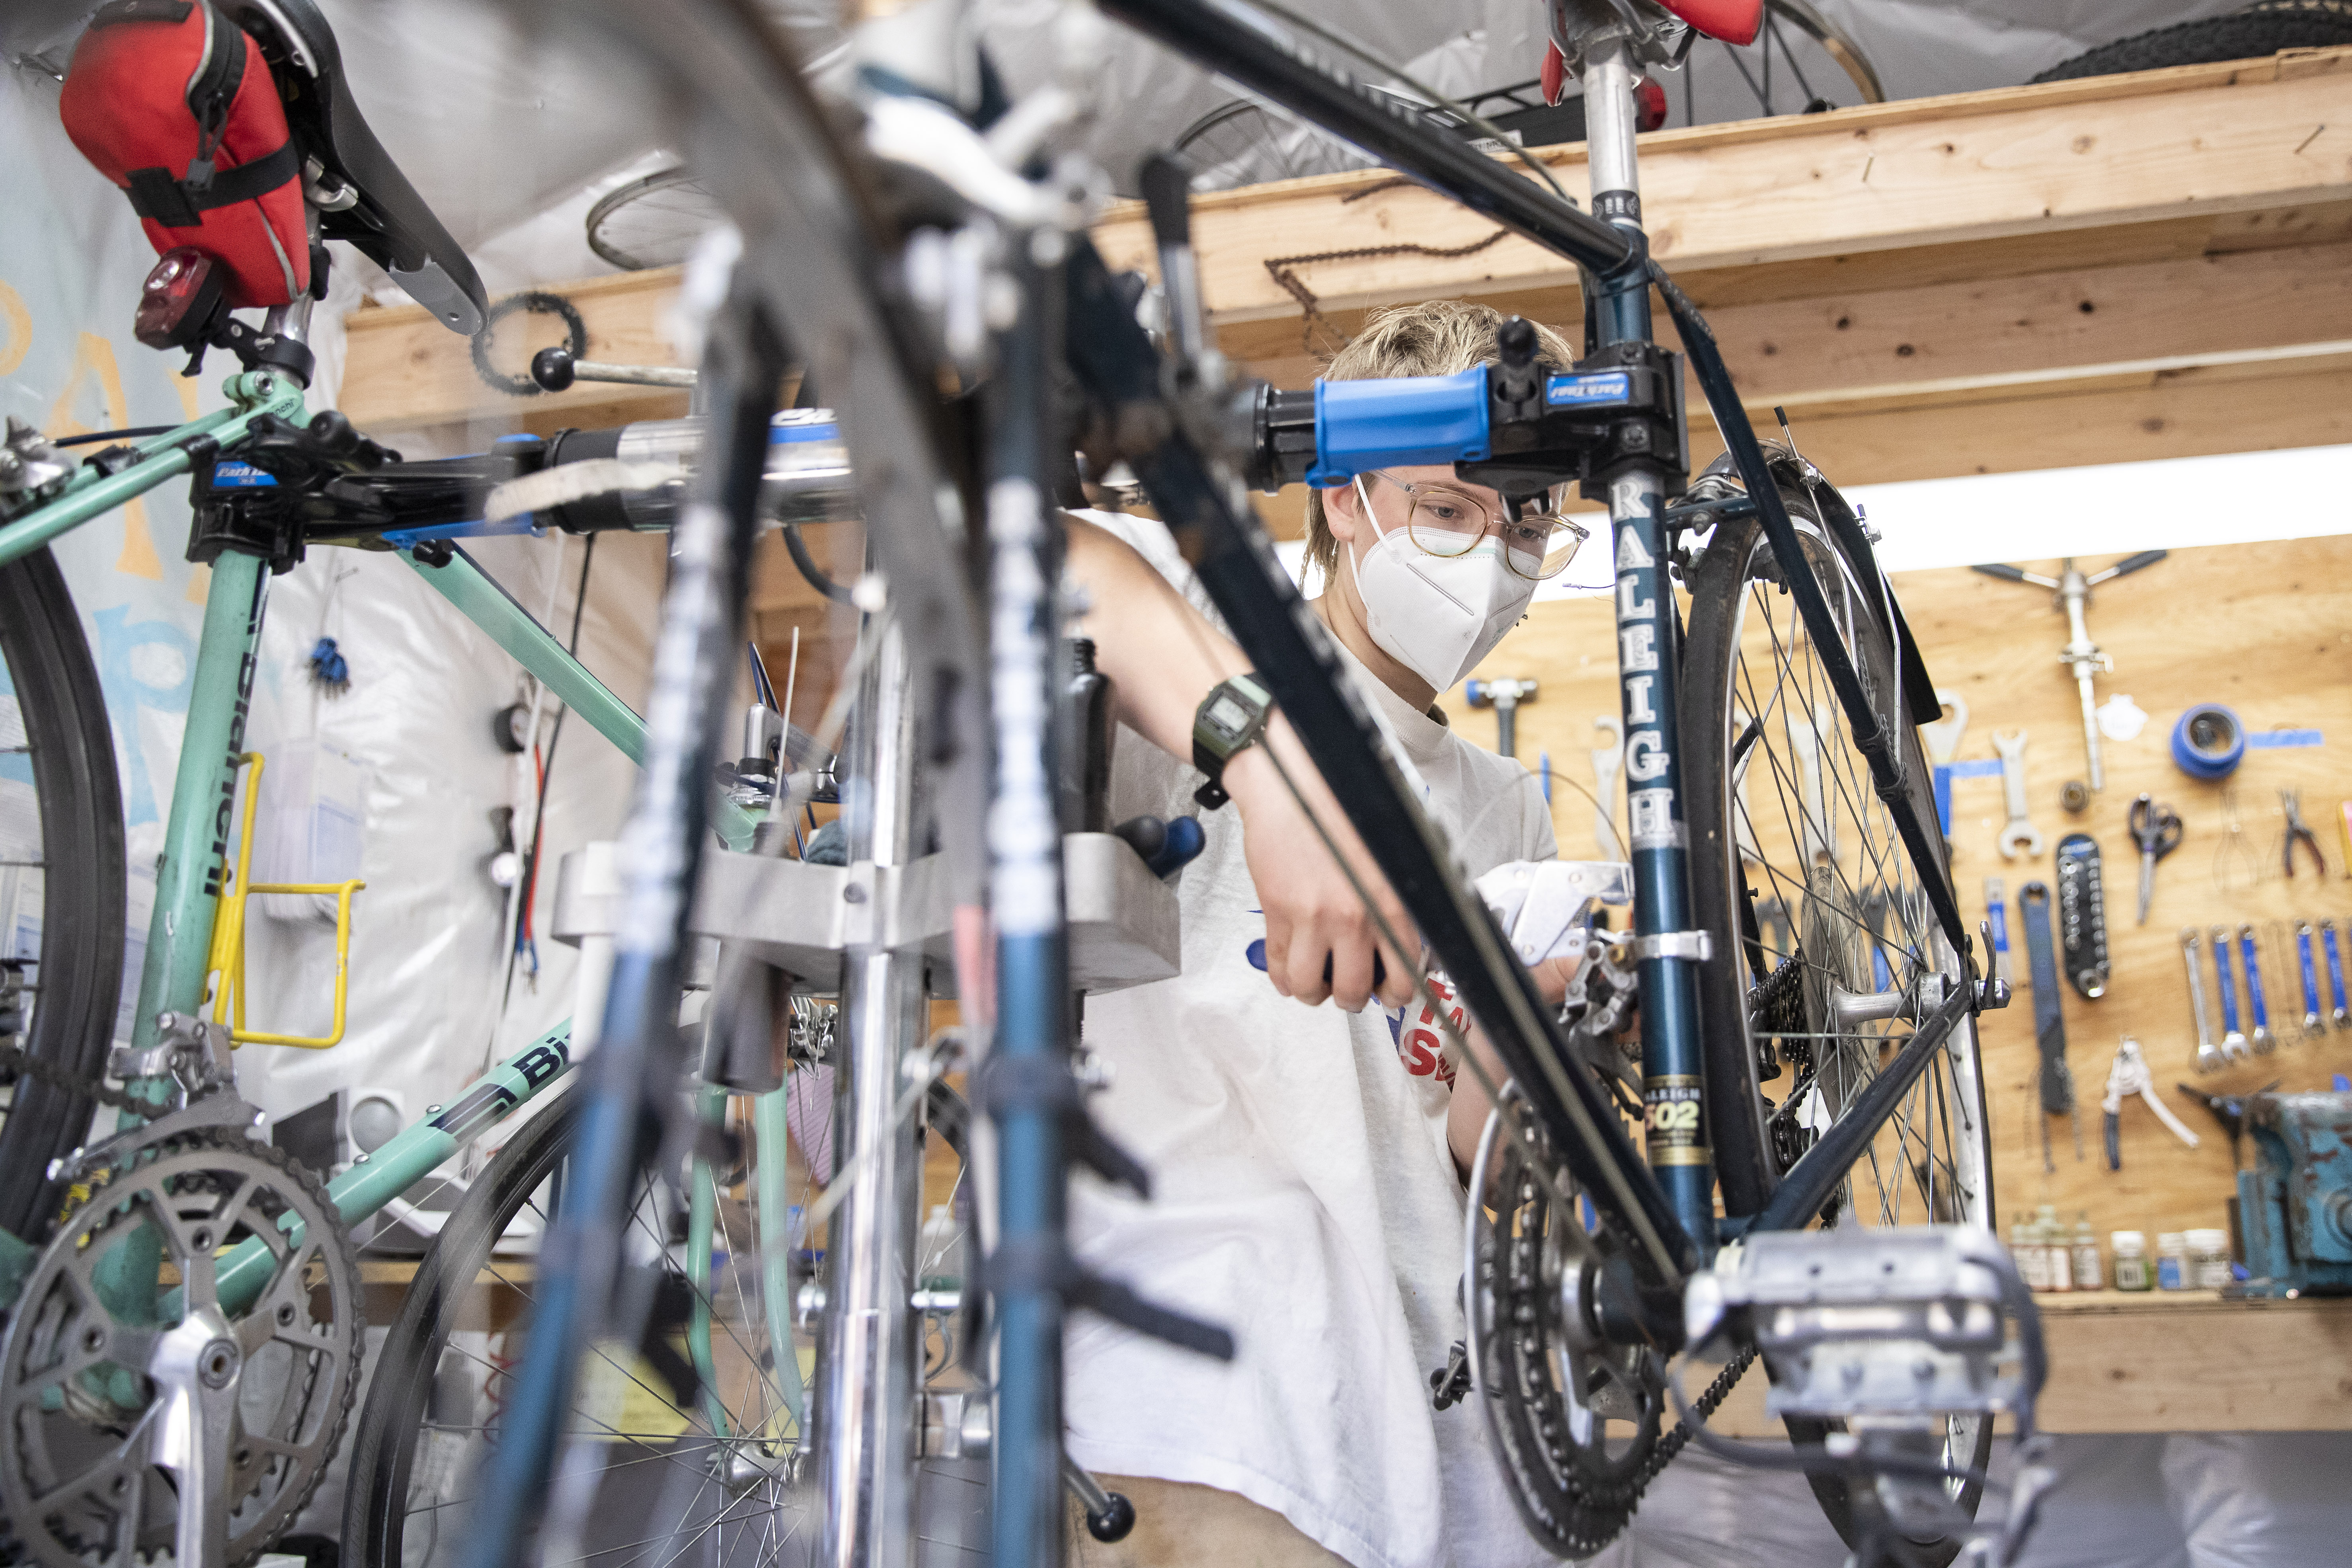 A student performing maintenance on a bike.